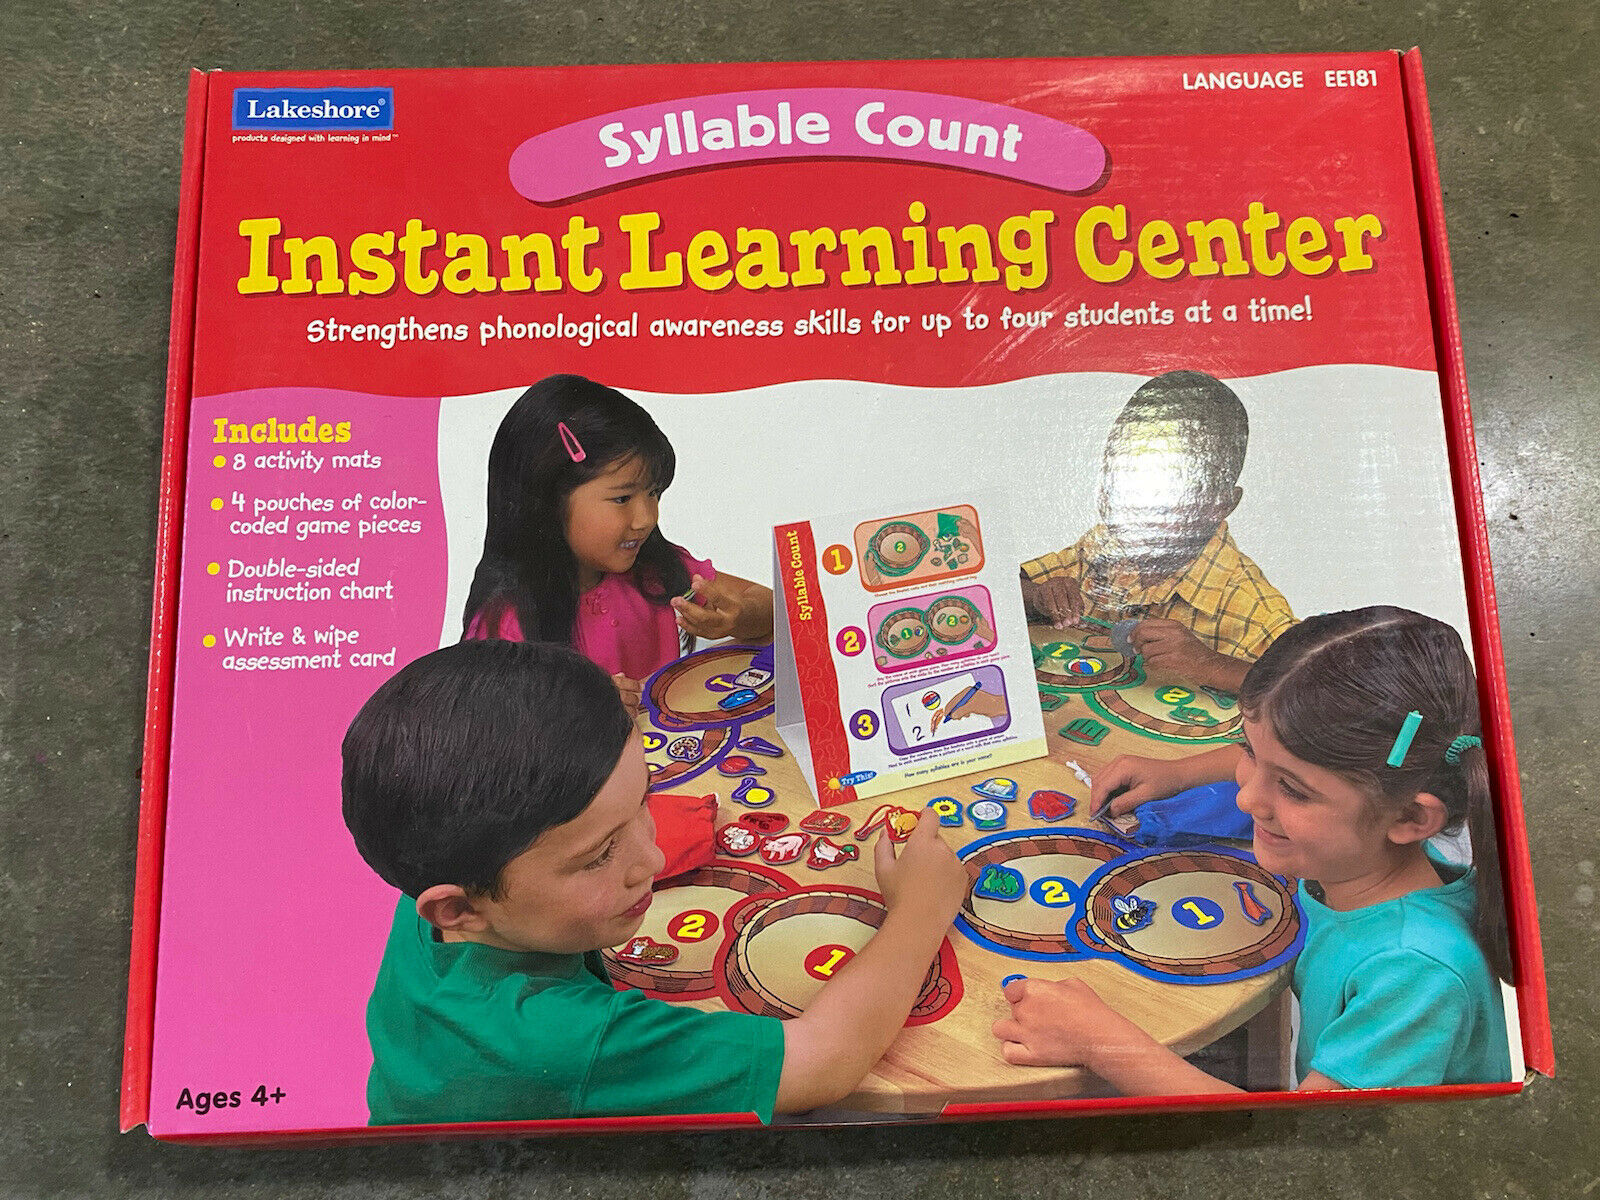 Lakeshore Syllable Count Instant Learning Center Complete Language Ee181 Teacher